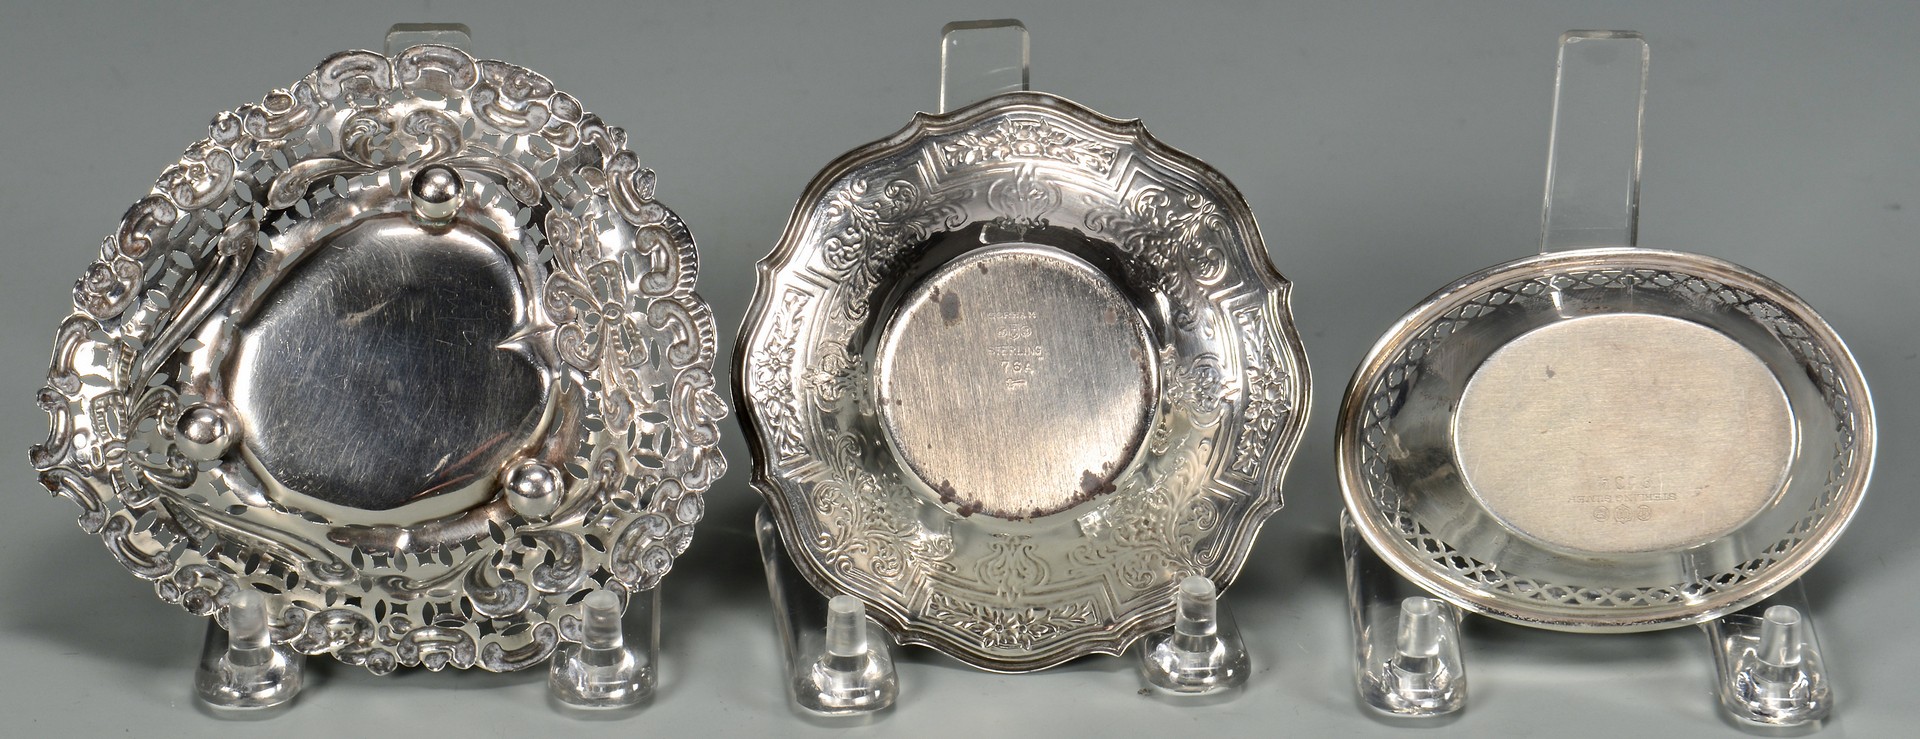 Lot 687: Silver swan compote, candy dishes, 17 pcs